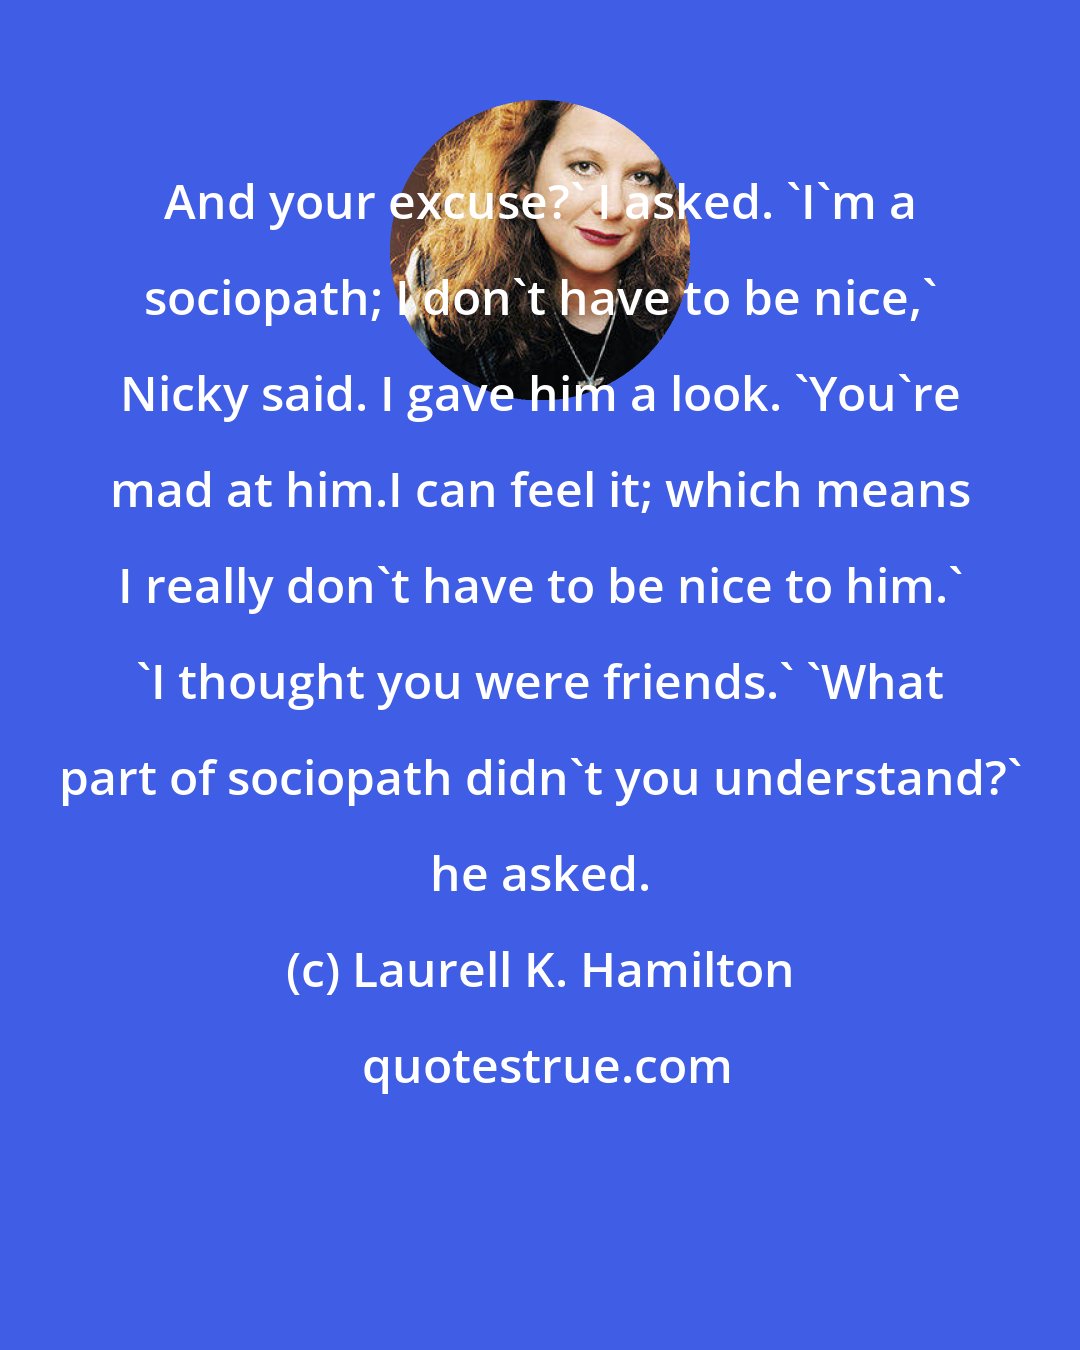 Laurell K. Hamilton: And your excuse?' I asked. 'I'm a sociopath; I don't have to be nice,' Nicky said. I gave him a look. 'You're mad at him.I can feel it; which means I really don't have to be nice to him.' 'I thought you were friends.' 'What part of sociopath didn't you understand?' he asked.